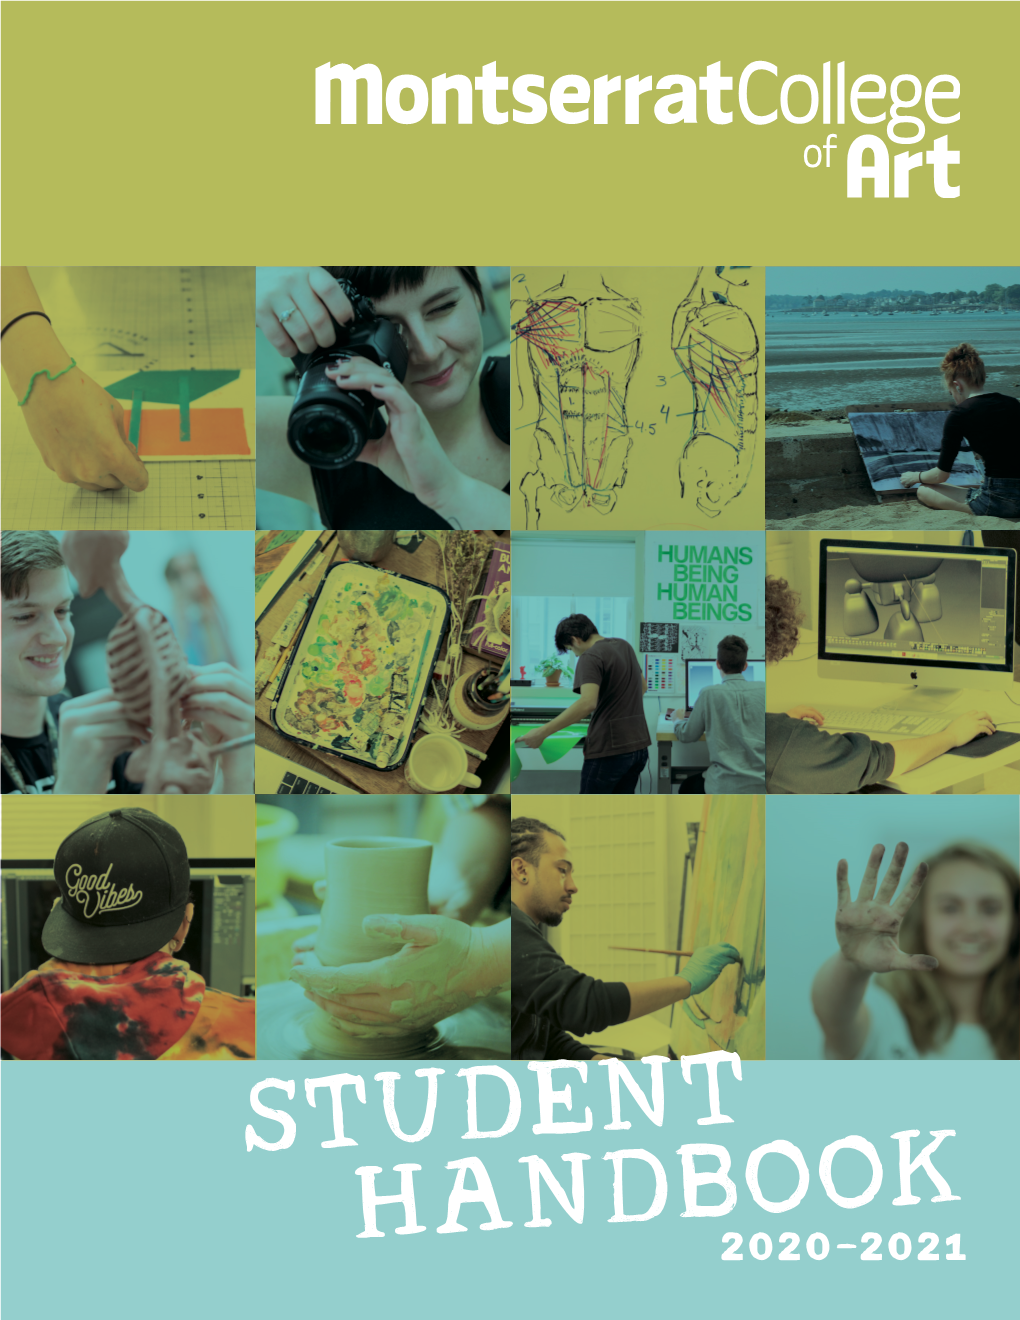 Student Handbook Contains All of the Information That It Usually Does